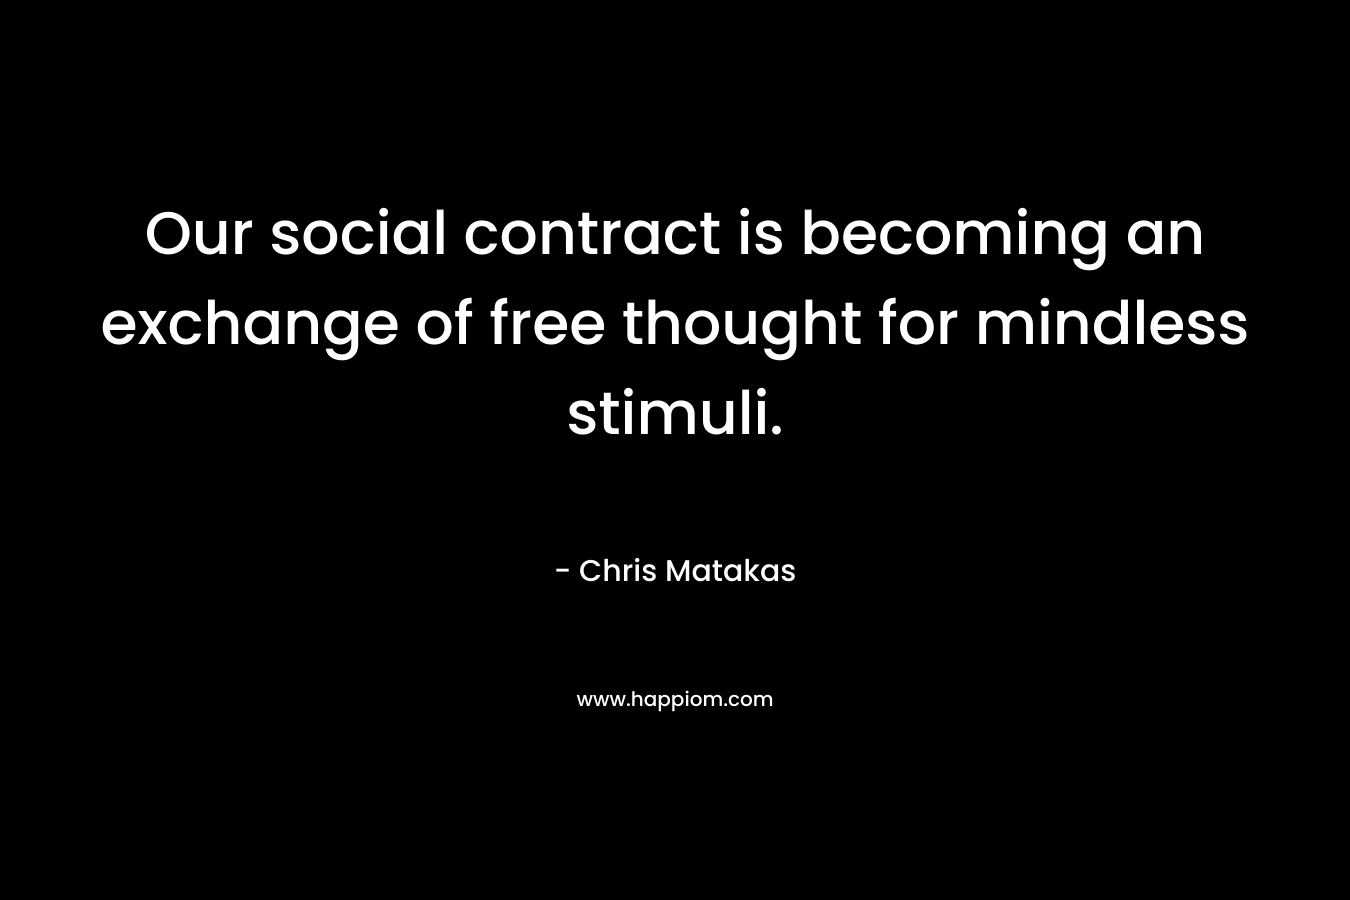 Our social contract is becoming an exchange of free thought for mindless stimuli.